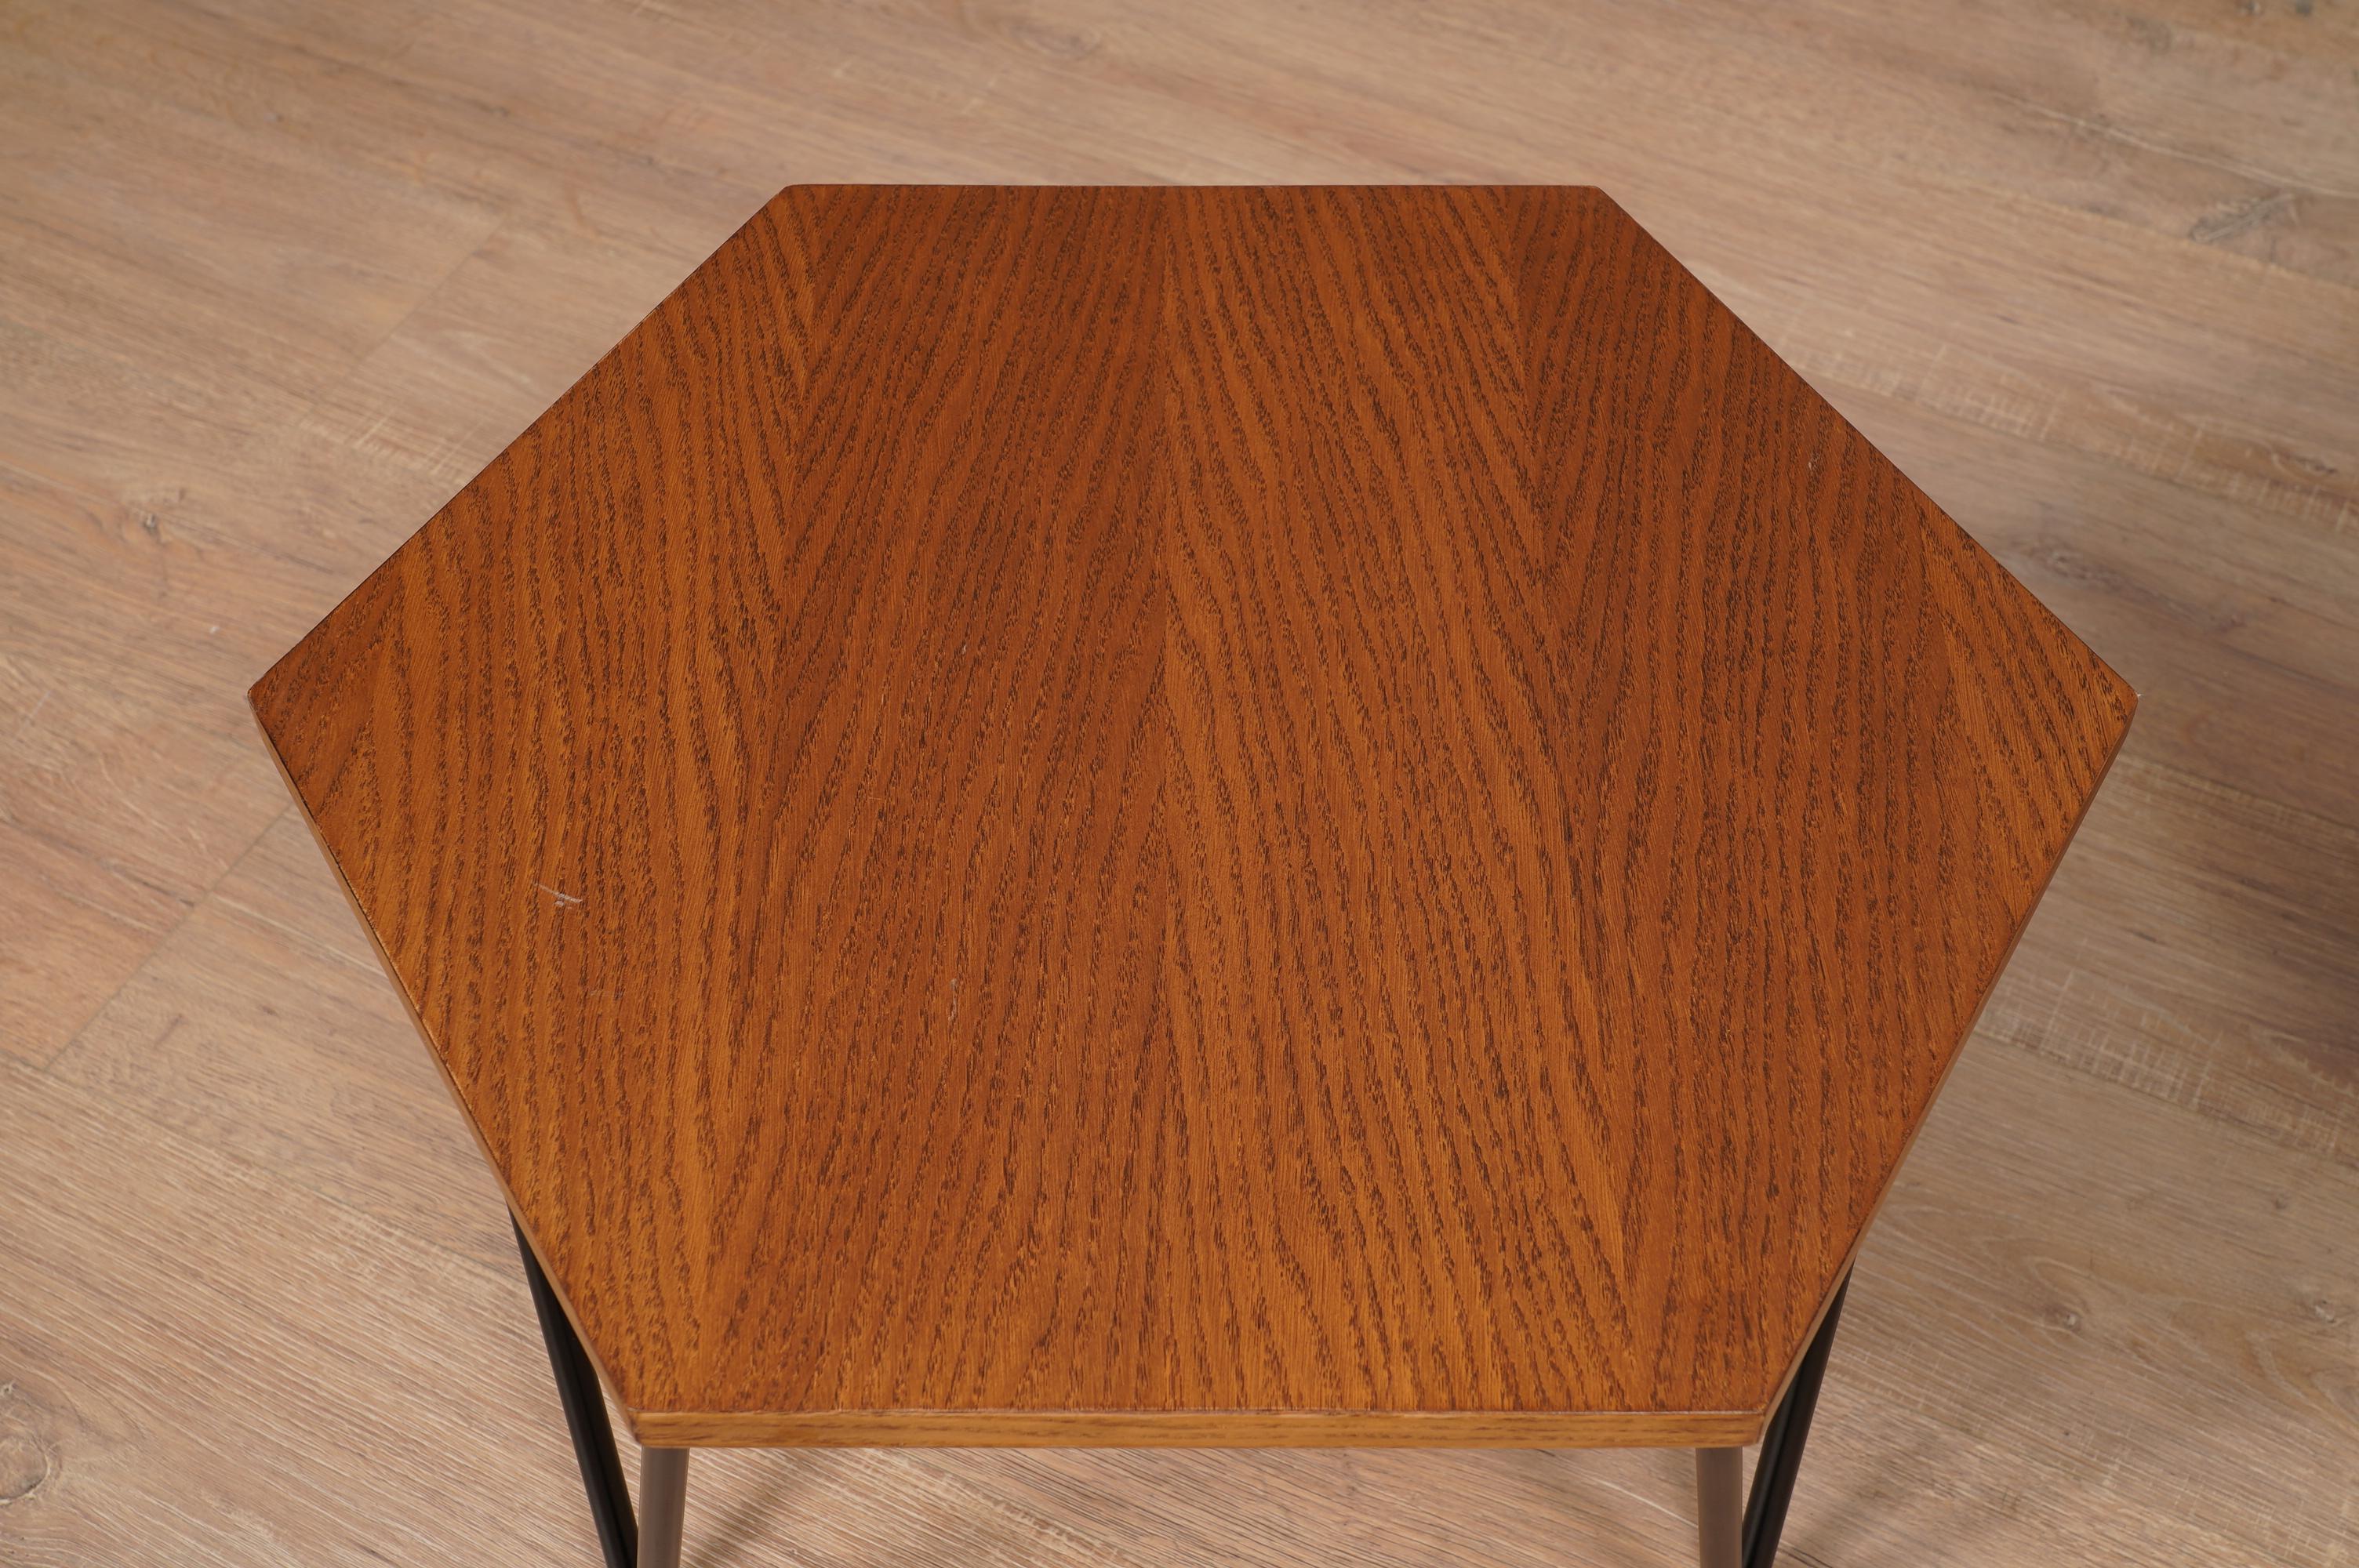 Italian Gio Ponti ISA Manufacturing Hexagonal Wood and Iron Side Table, 1960 For Sale